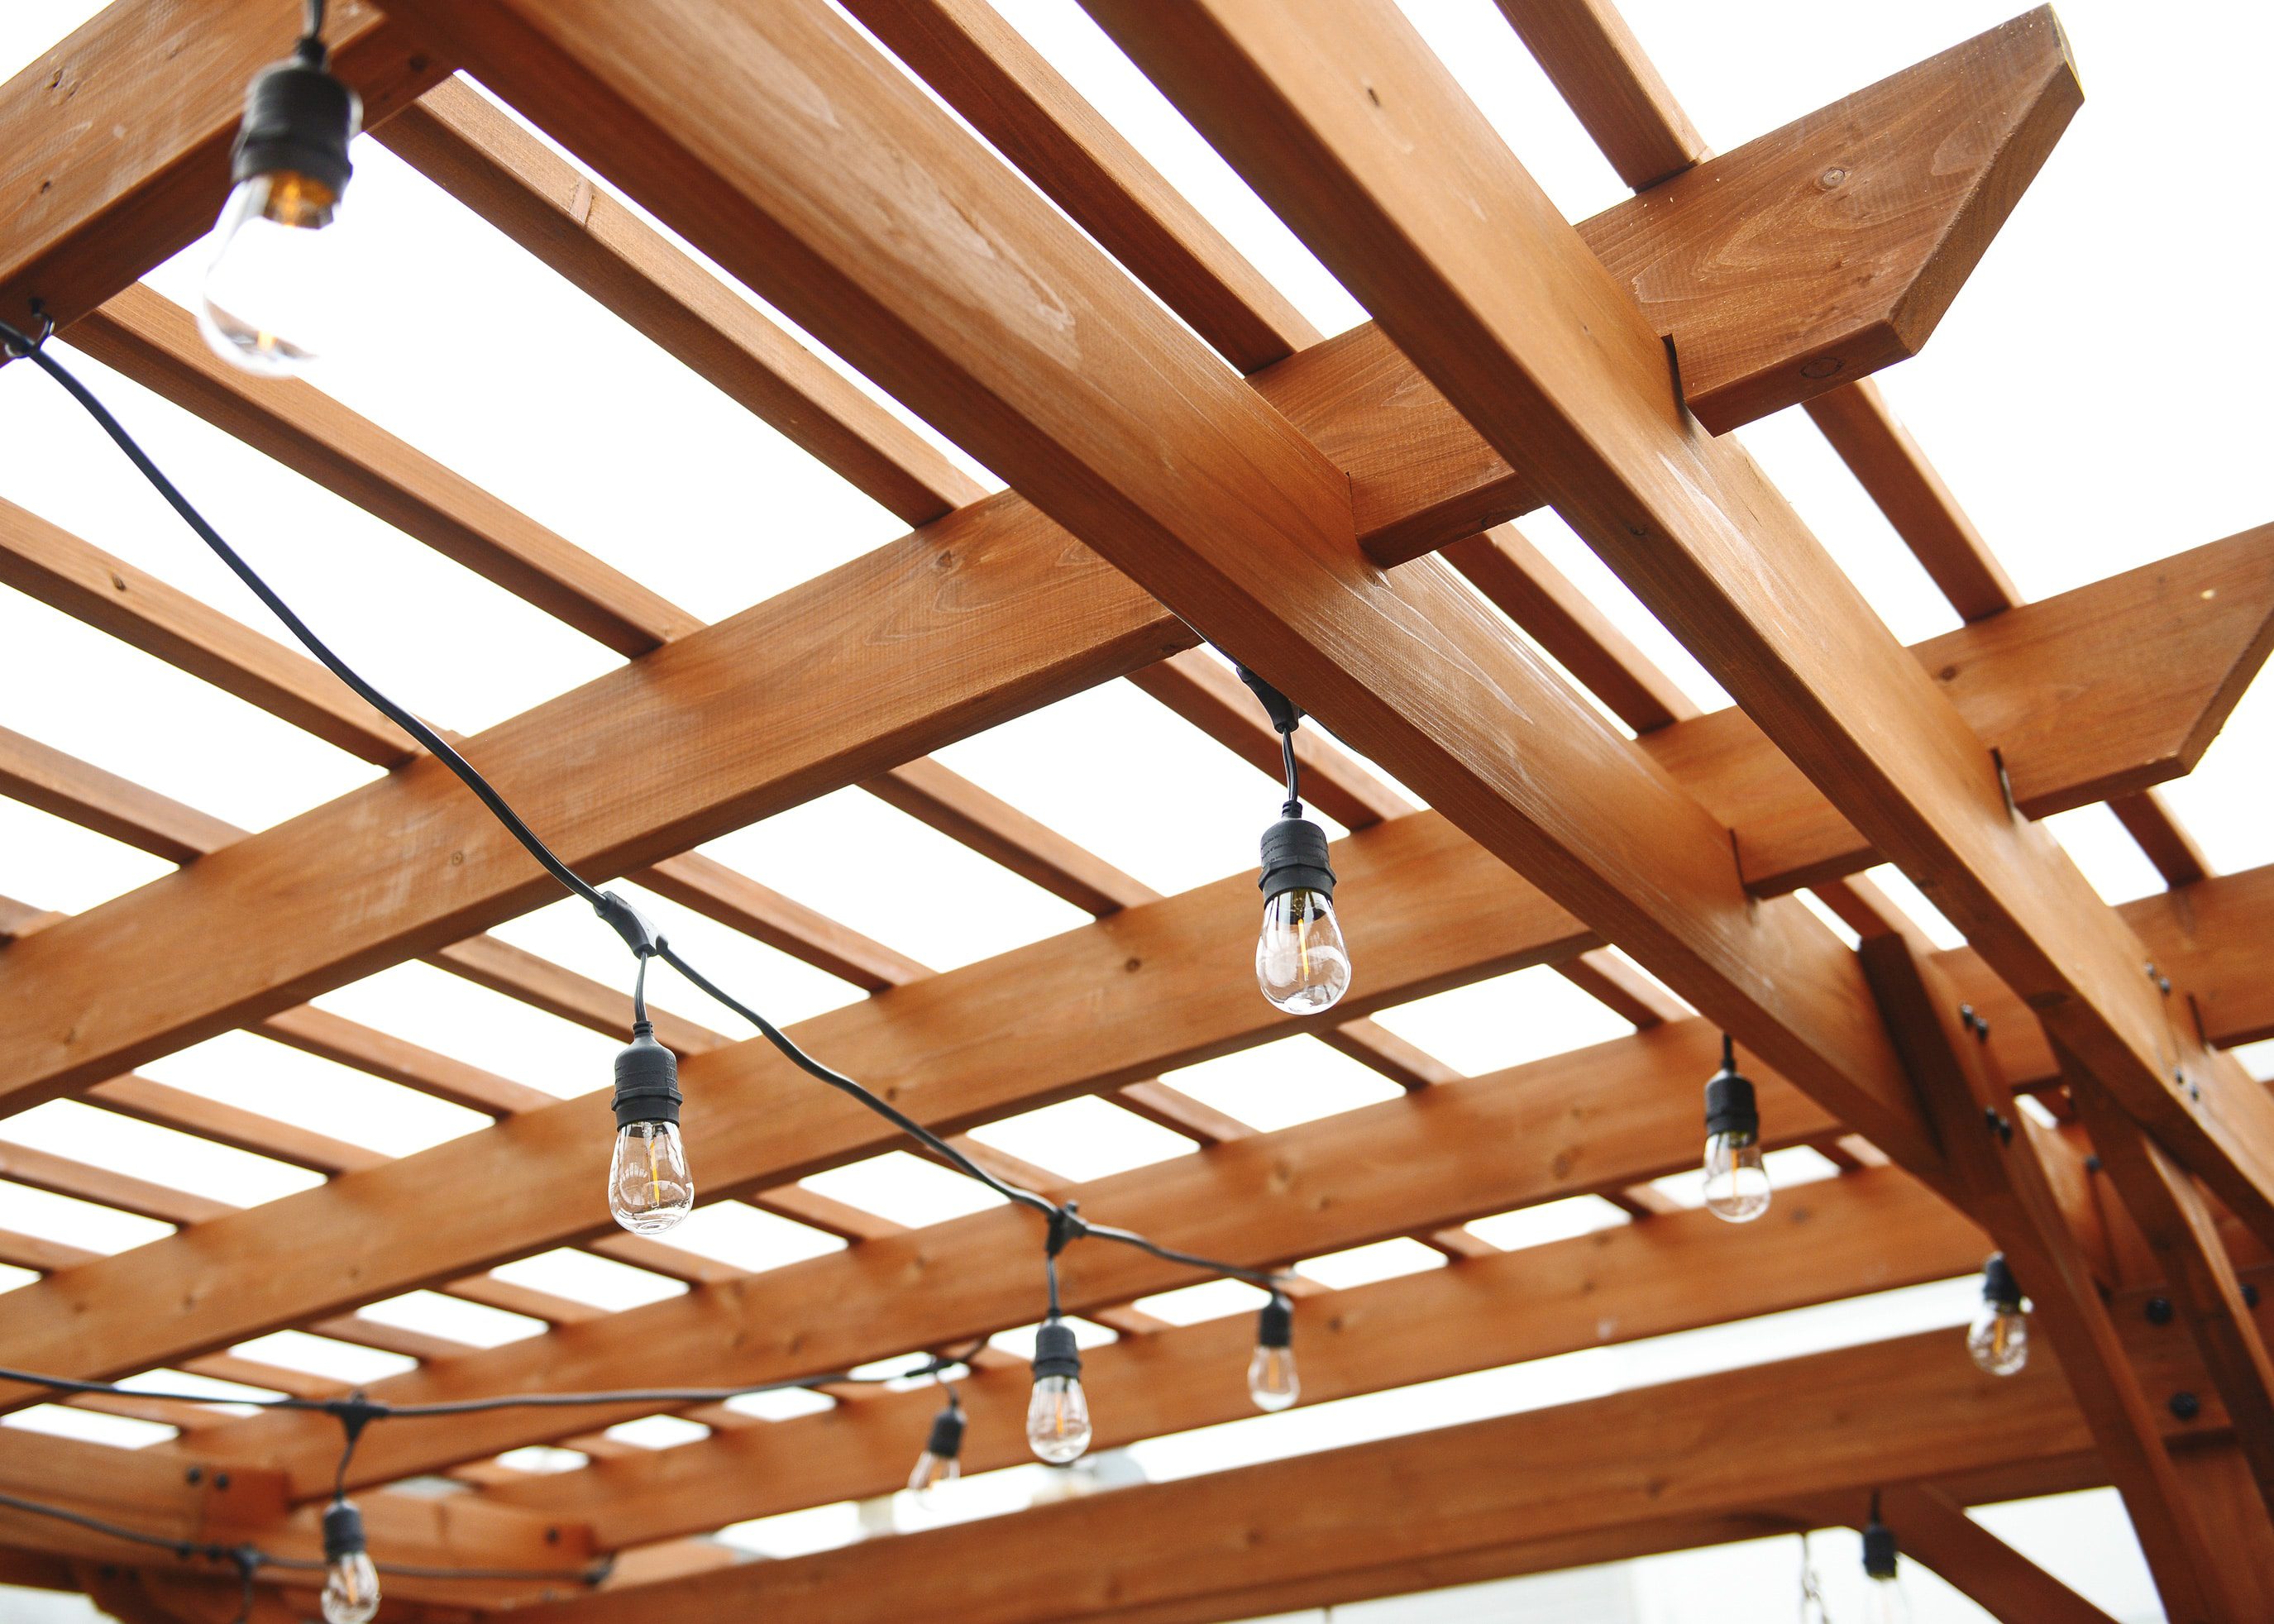 A rooftop pergola reveal using a kit from Lowe's! // via Yellow Brick Home